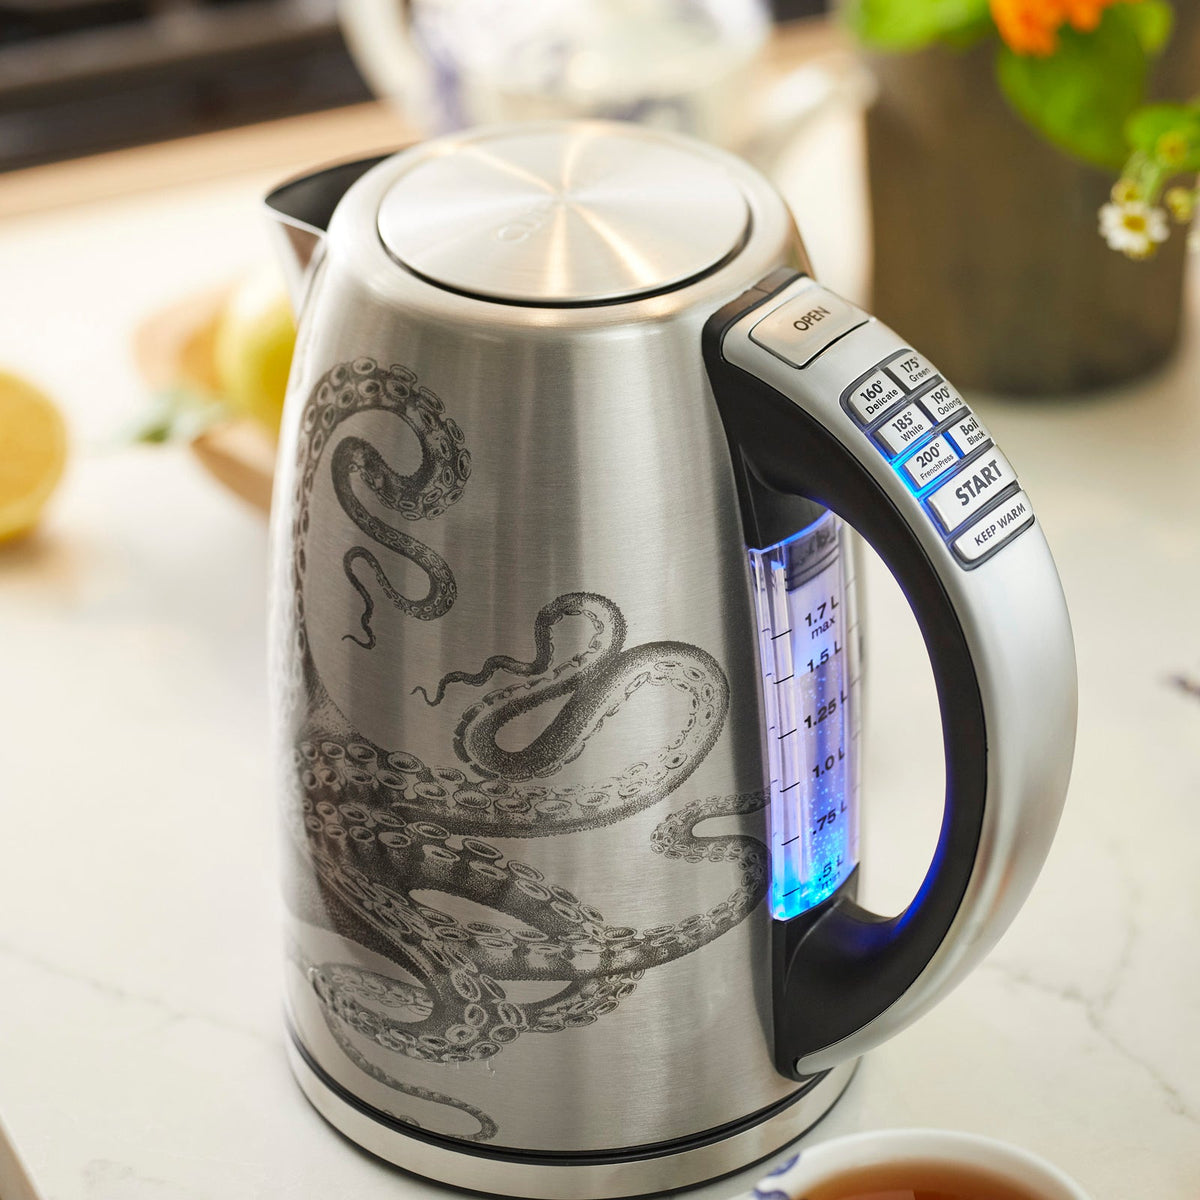 An electric kettle, the Caskata X Cuisinart Limited Edition Lucy Programmable Electric Kettle with a whimsical octopus design, perfect for brewing tea.